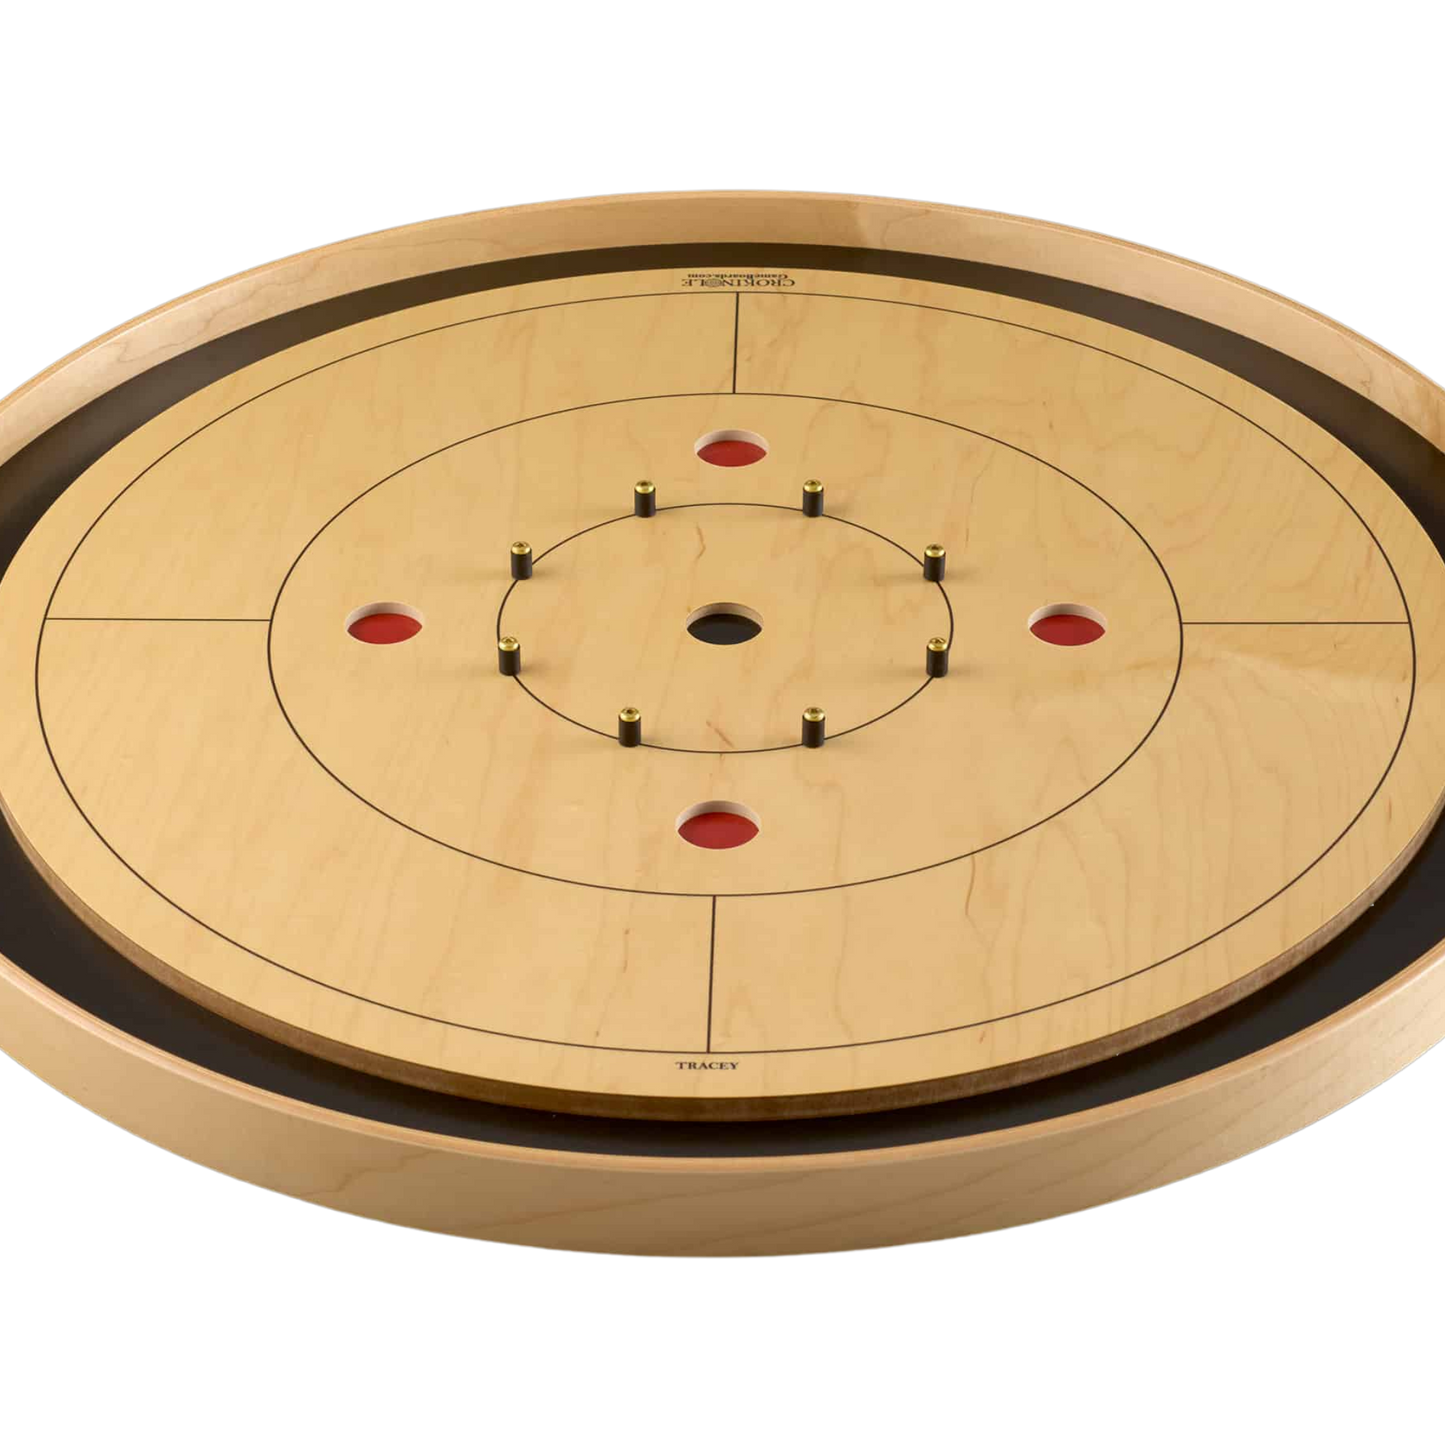 How To Play Crokinole - Tracey Boards